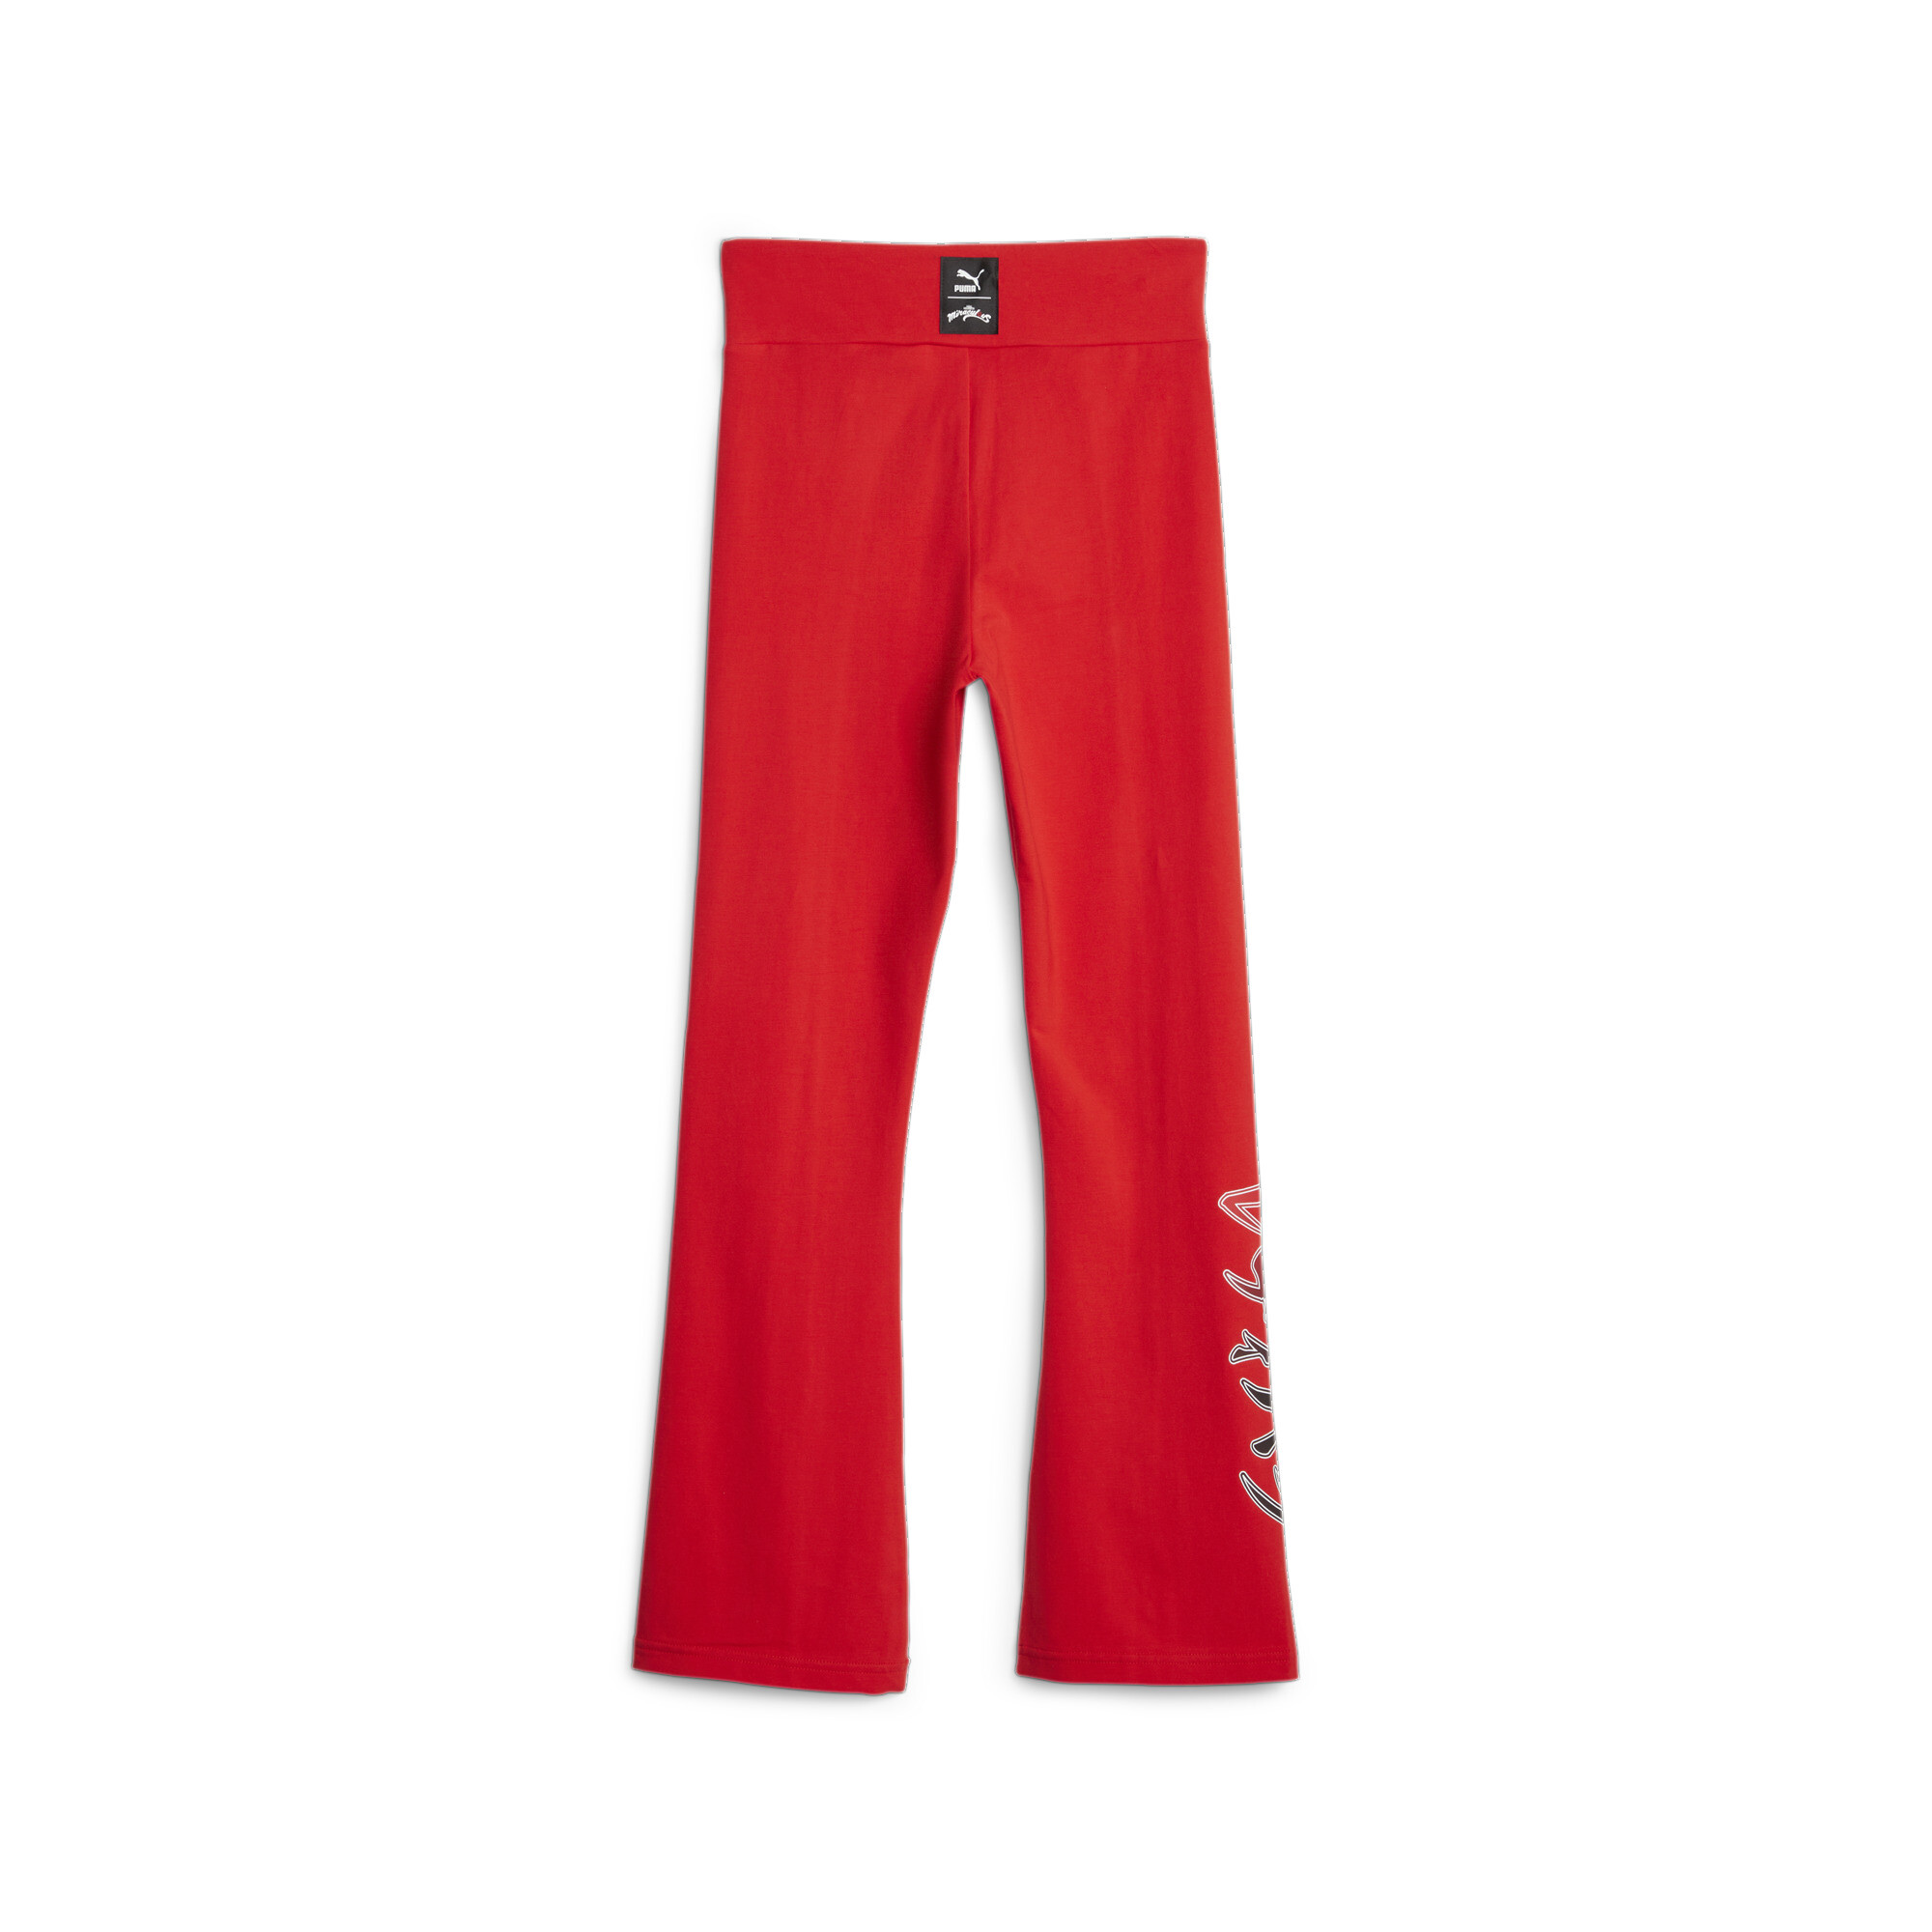 PUMA X MIRACULOUS Leggings In Red, Size 9-10 Youth